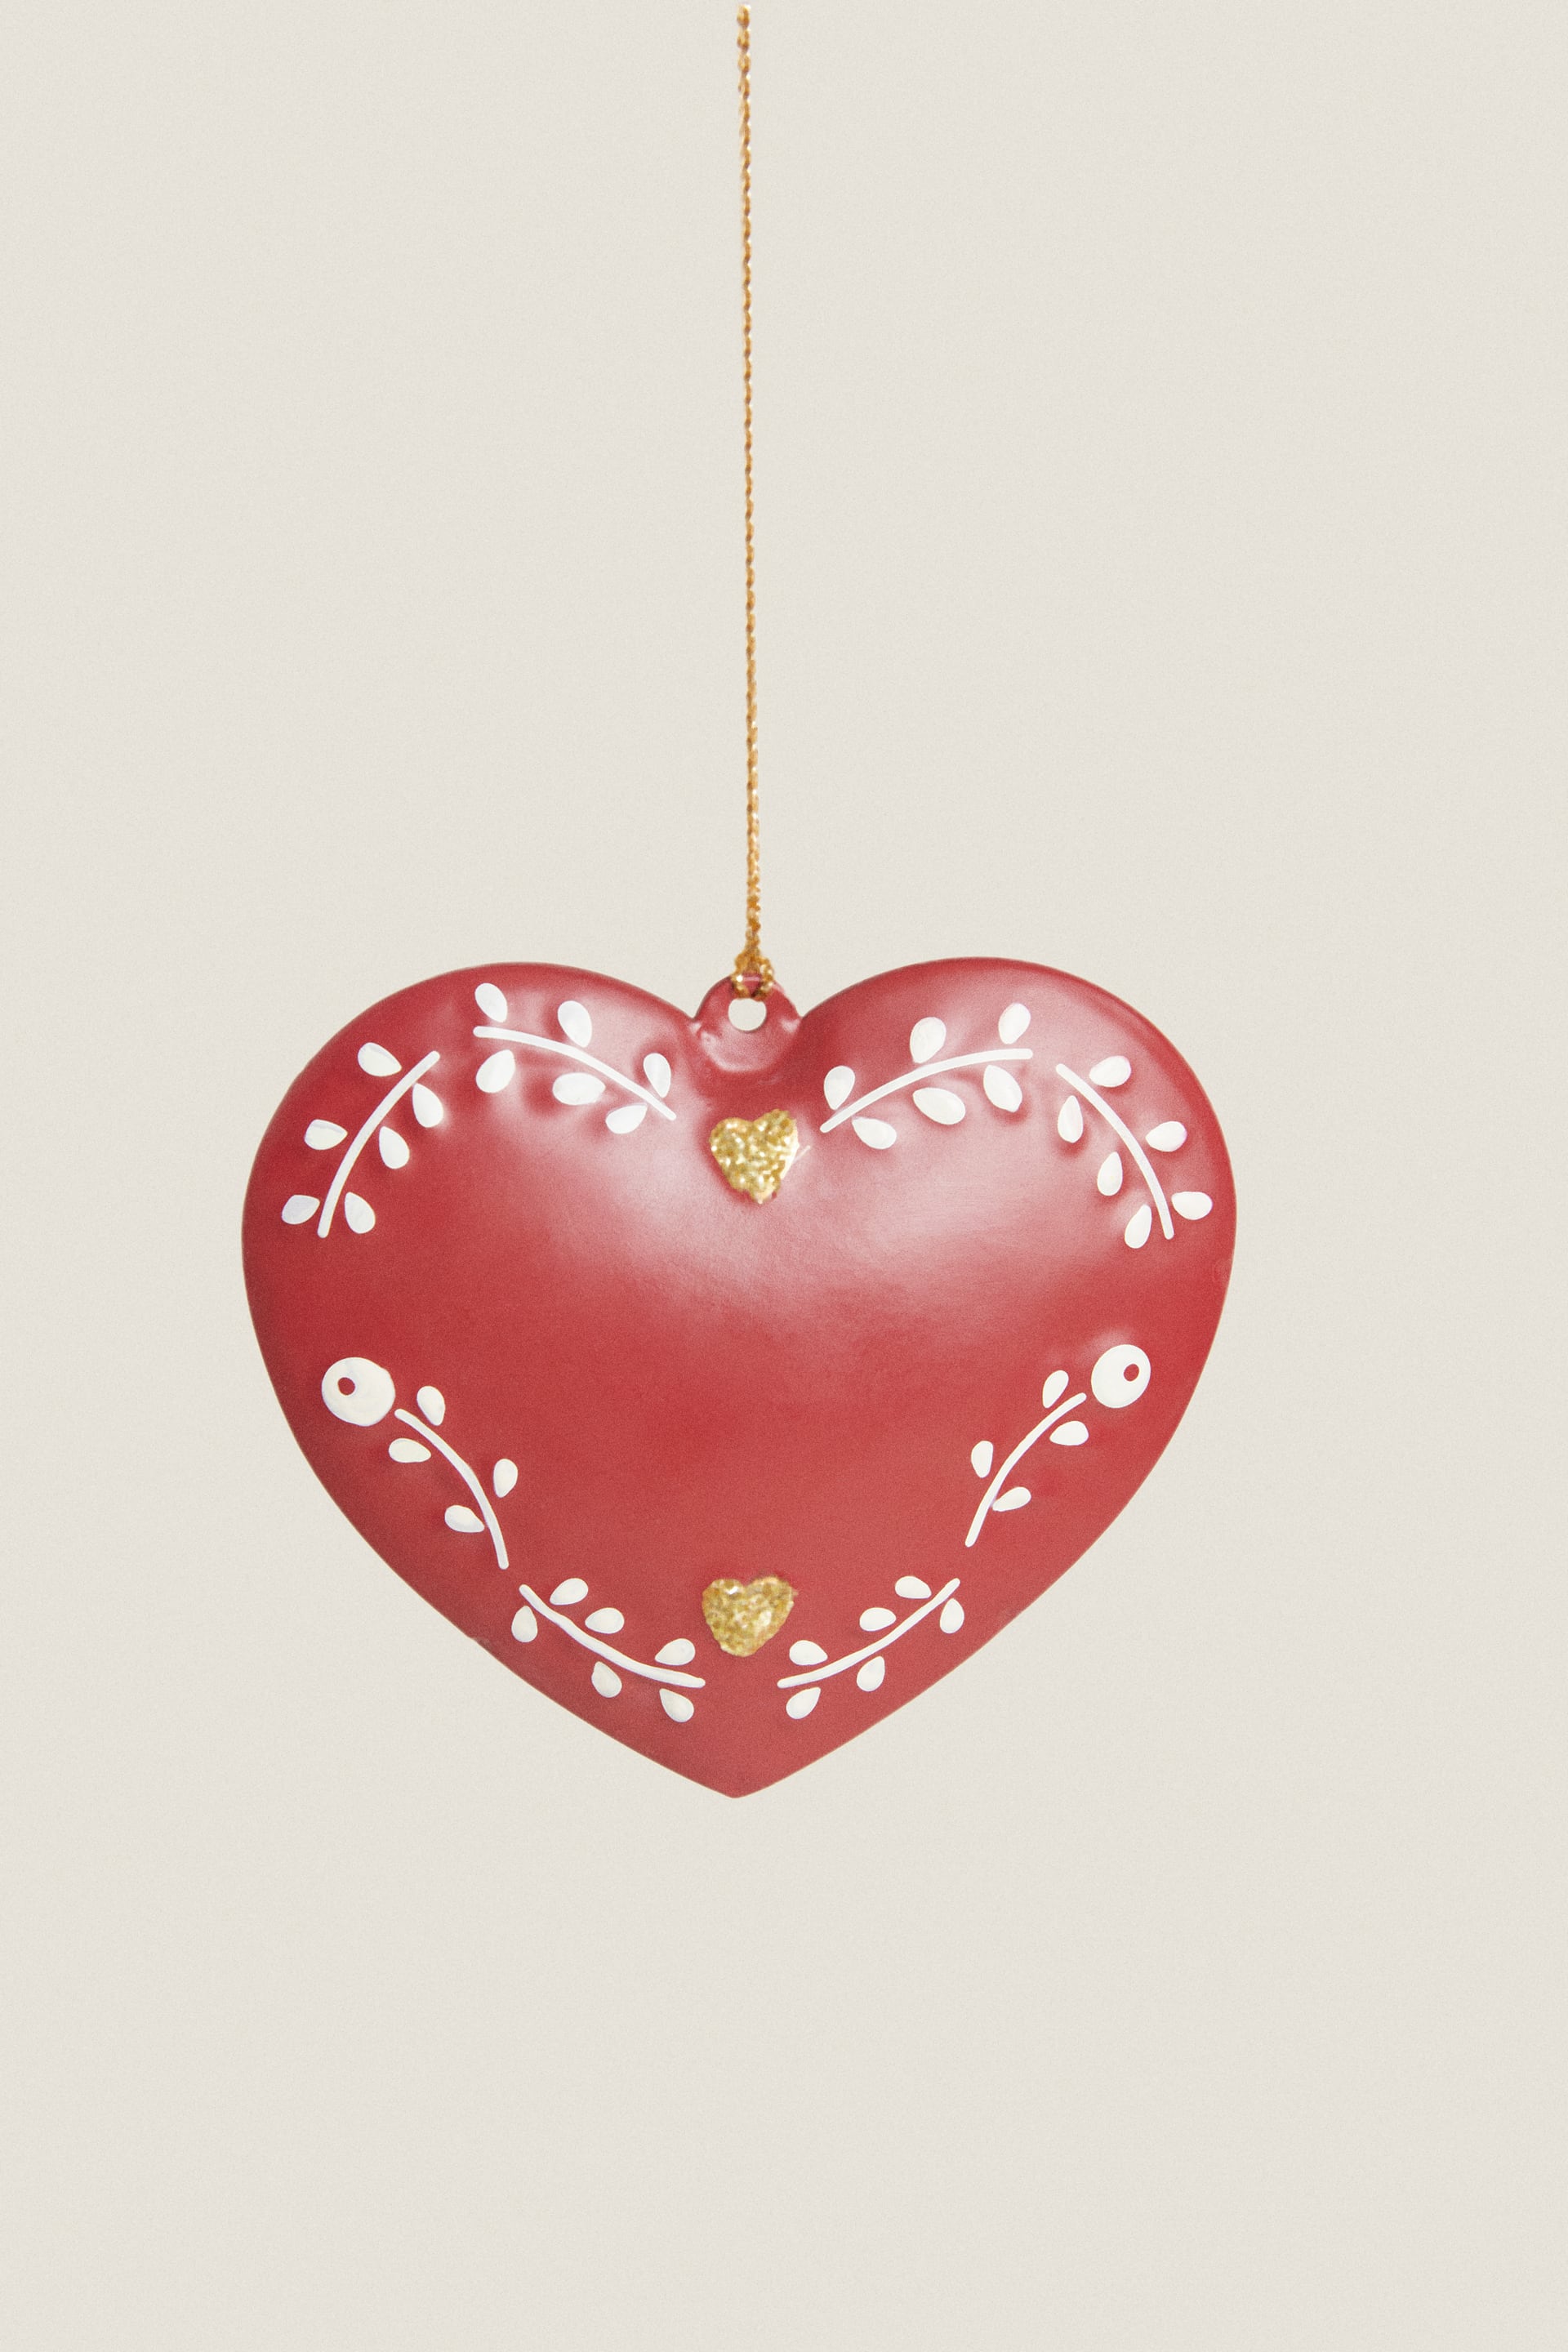 METAL CHRISTMAS HEART ORNAMENT - Red